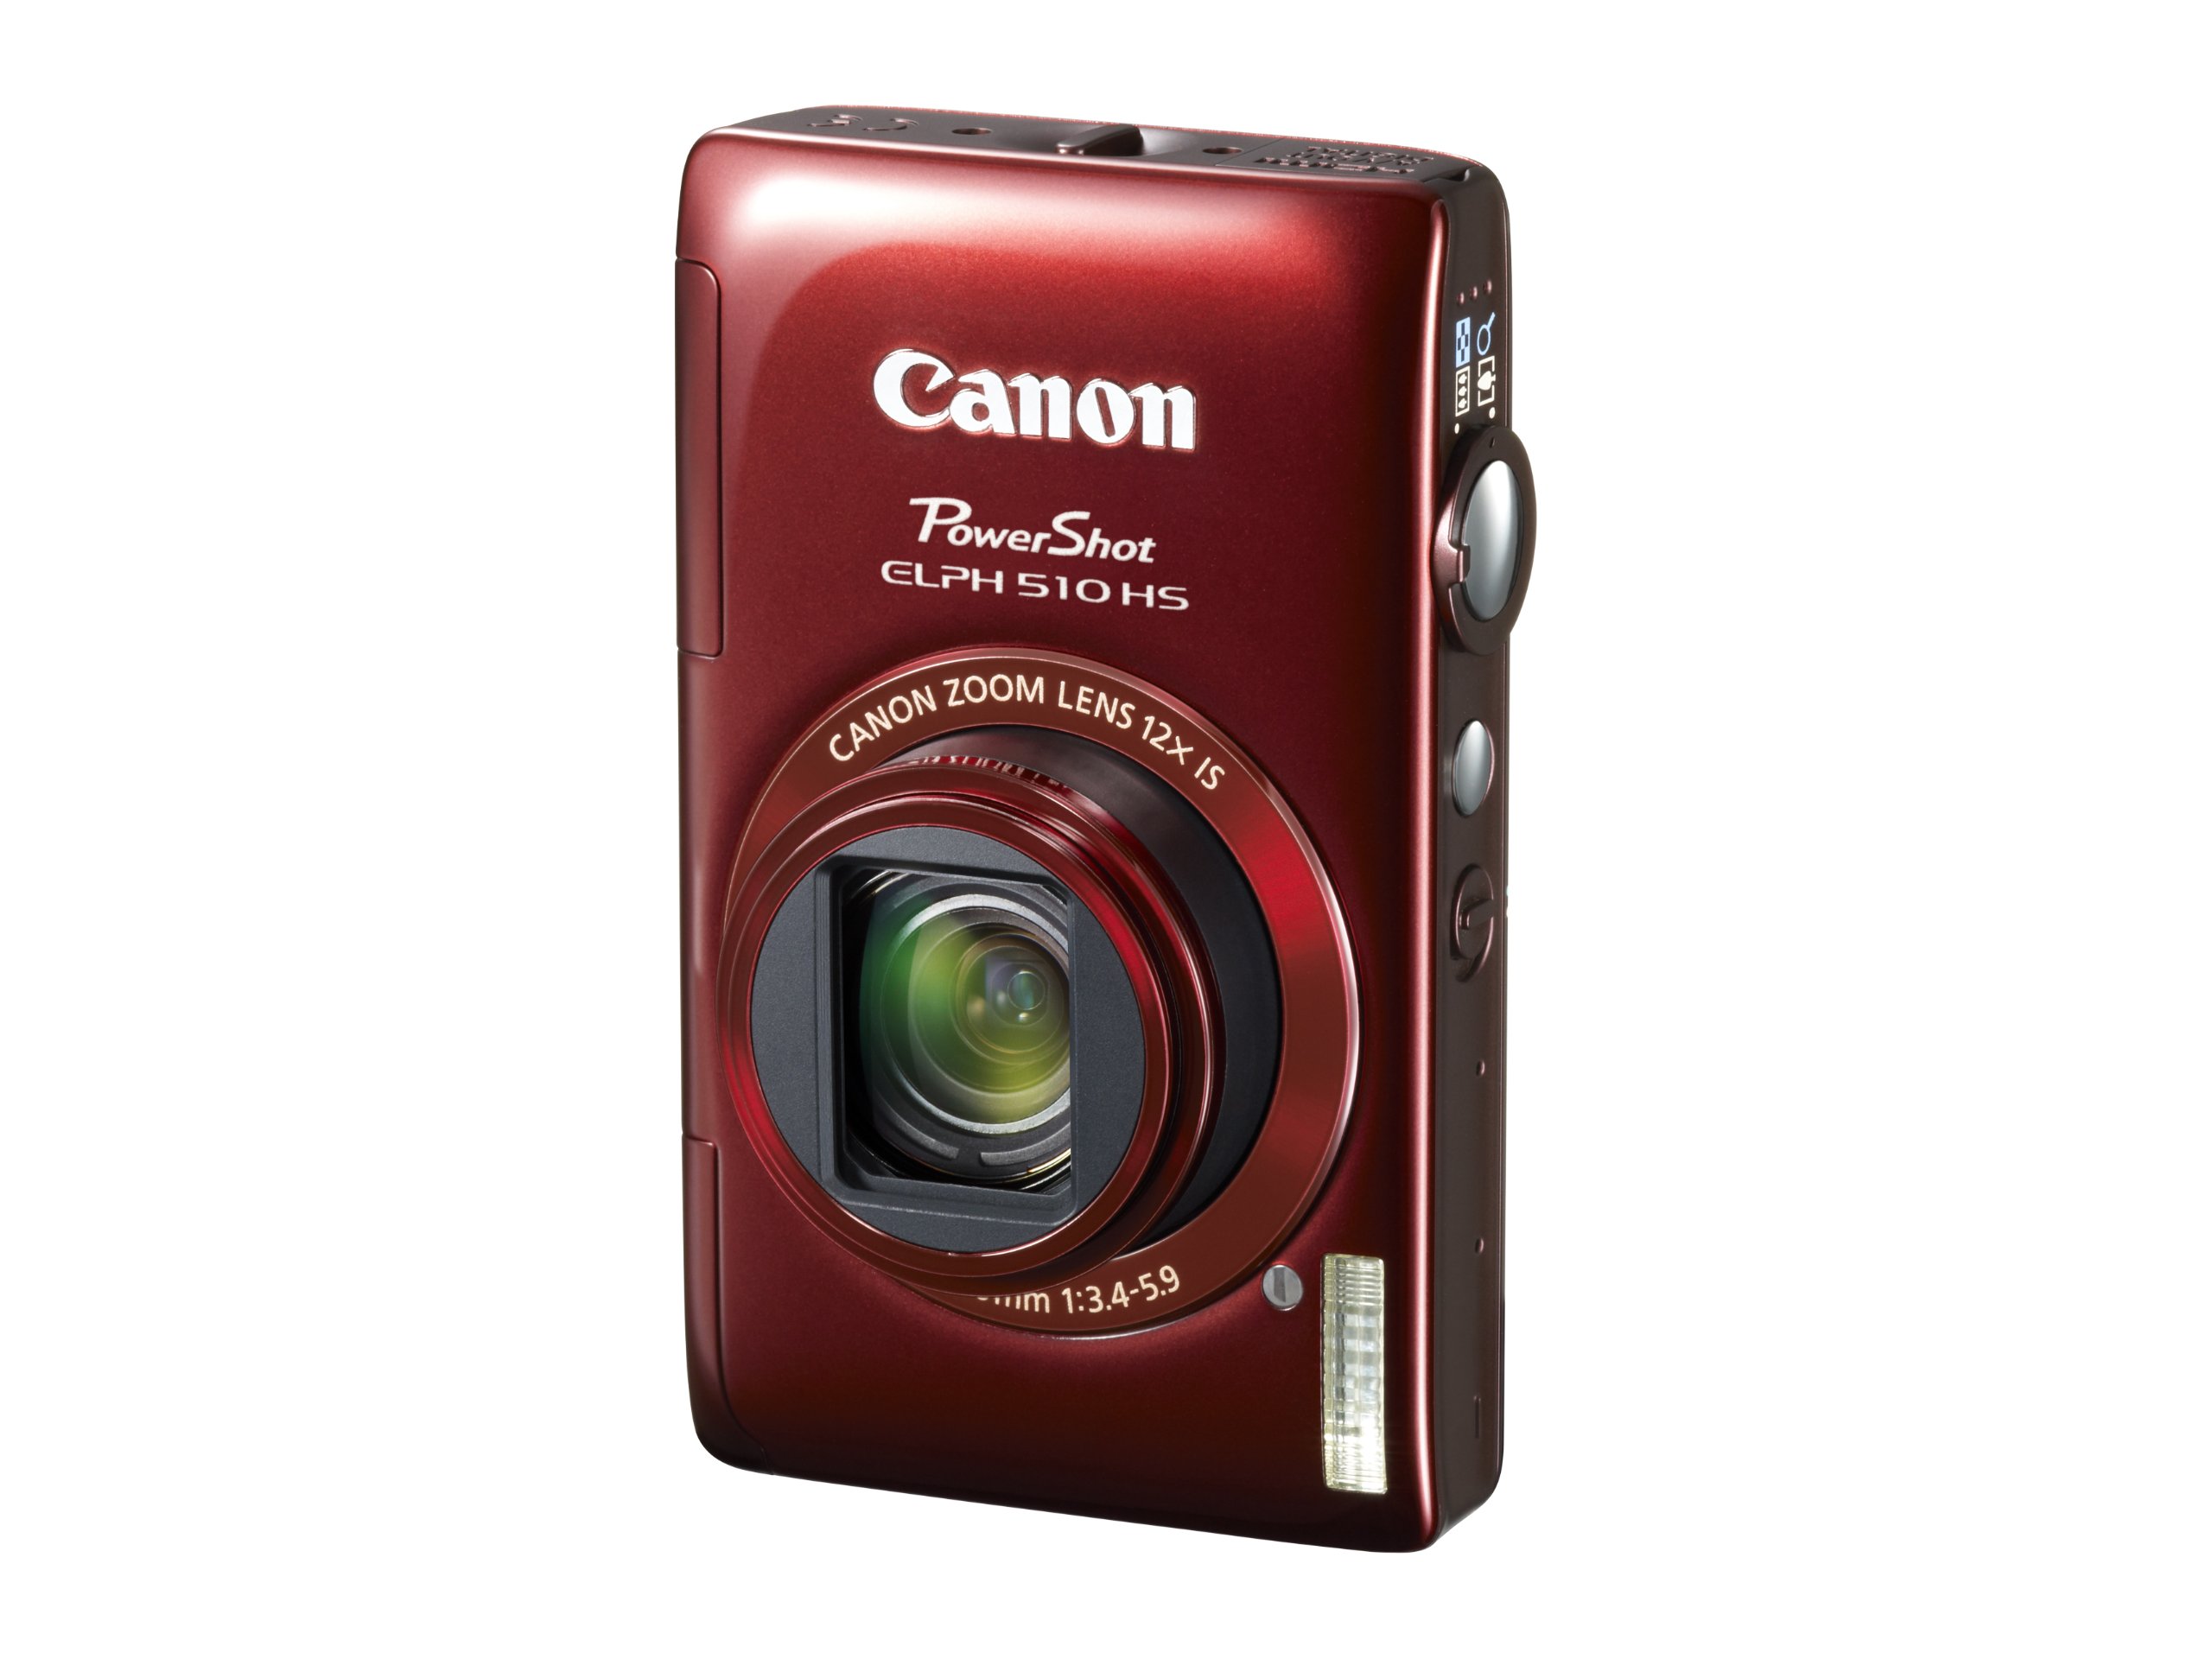 Canon PowerShot ELPH 510 HS 12.1 MP CMOS Digital Camera with Full HD Video and Ultra Wide Angle Lens (Red)